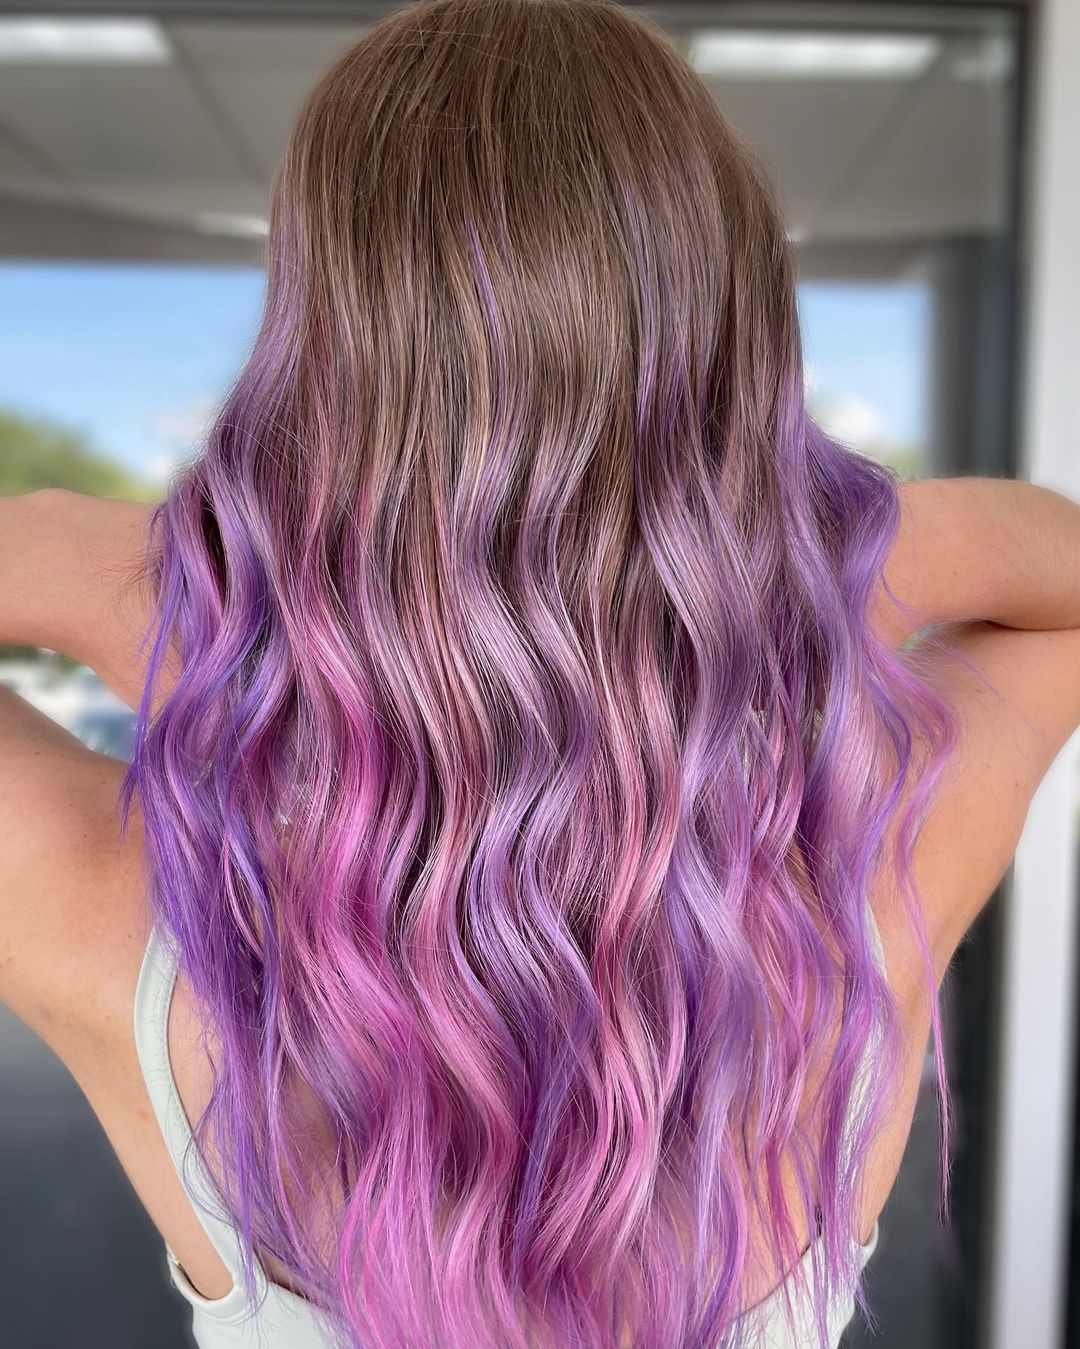  Light Purple and Pink Ombre on Long Light Brown Hair